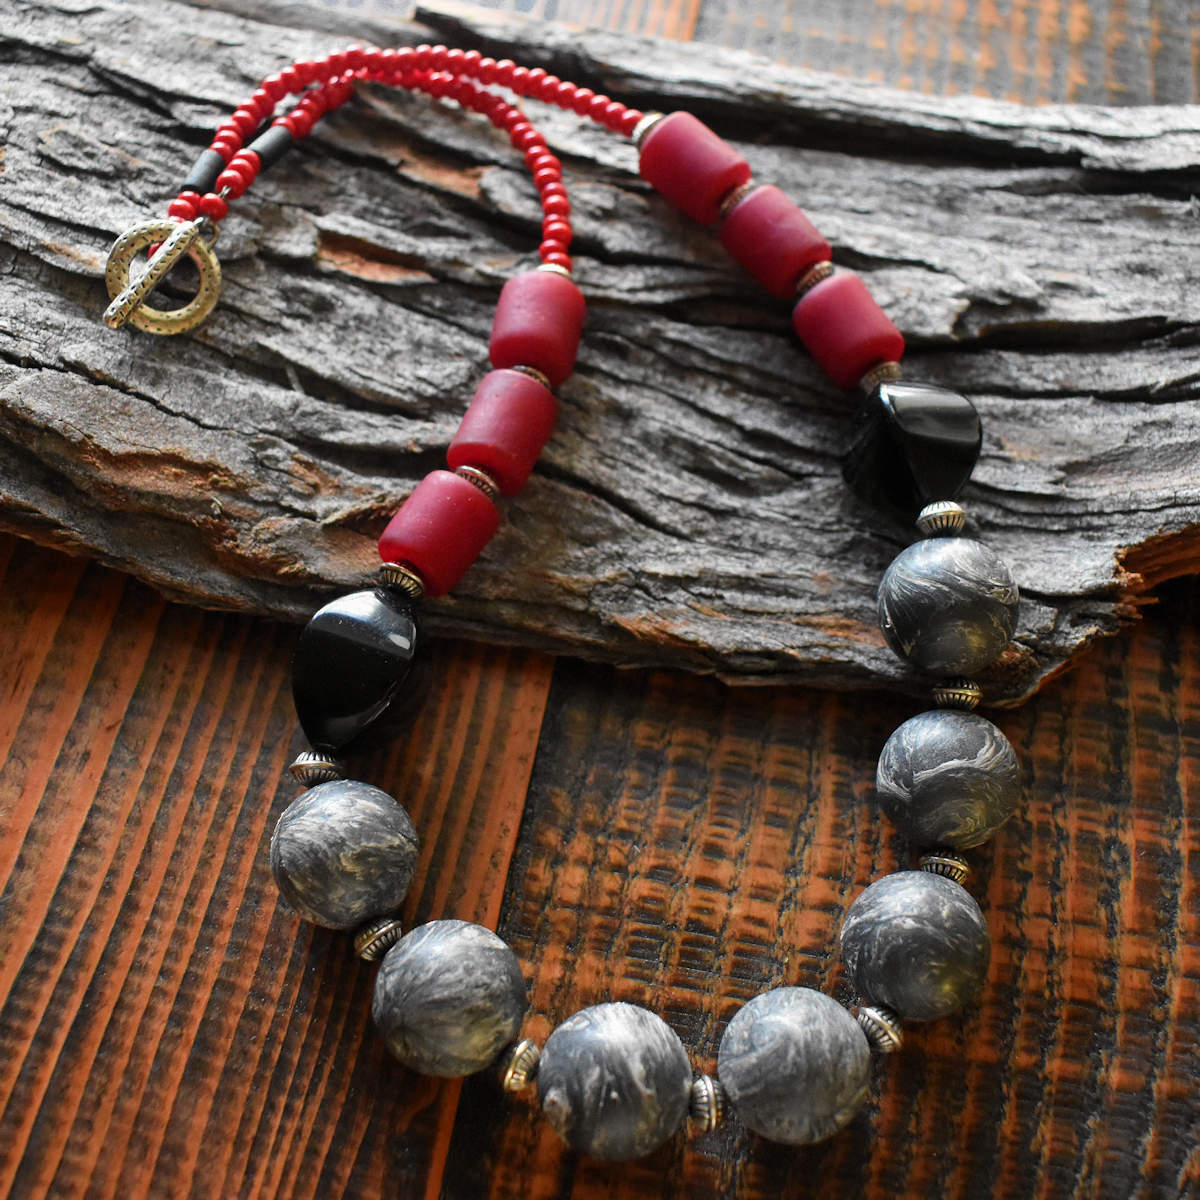 A gray, red, and black beaded necklace lays across a wood background. The necklace has seven gray and white swirled beads in the center, shiny black beads on either side, followed by three chunky matte red tube beads.  The back of the necklace is red seed beads with a silver toggle clasp.